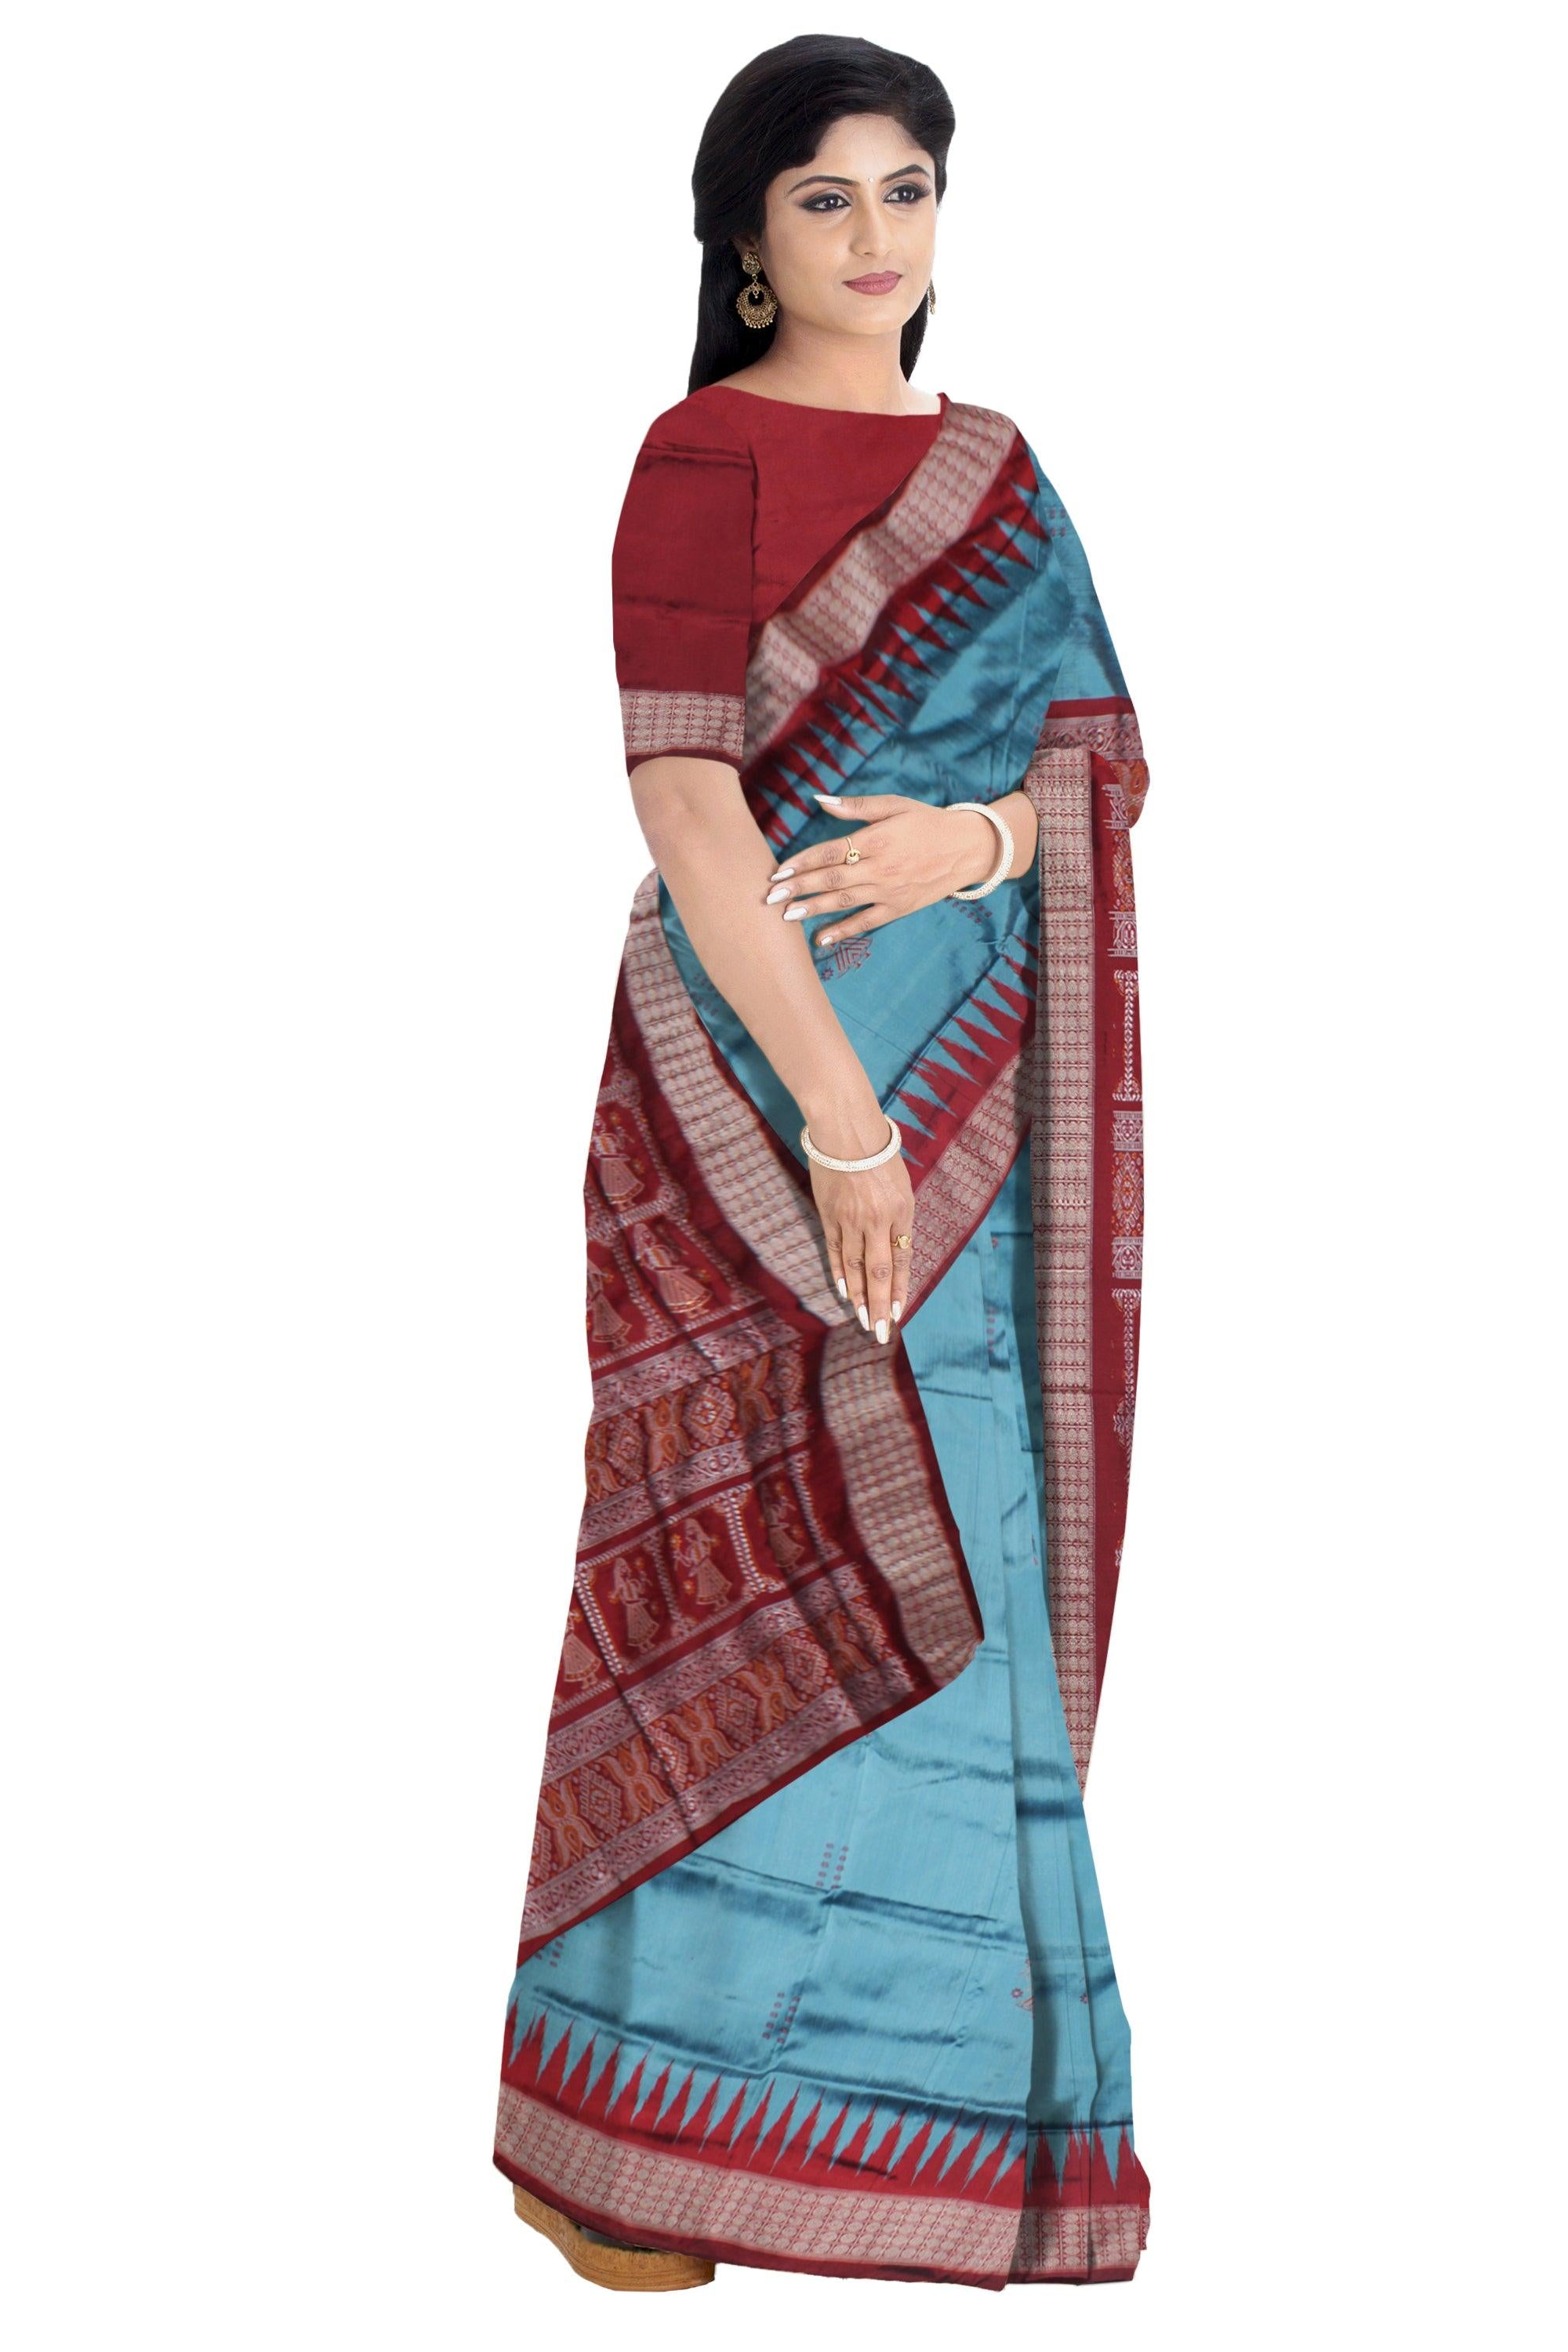 DOLL PRINT PATA SAREE IS SKY AND MAROON COLOR BASE, COMES WITH MATCHING BLOUSE PIECE. - Koshali Arts & Crafts Enterprise